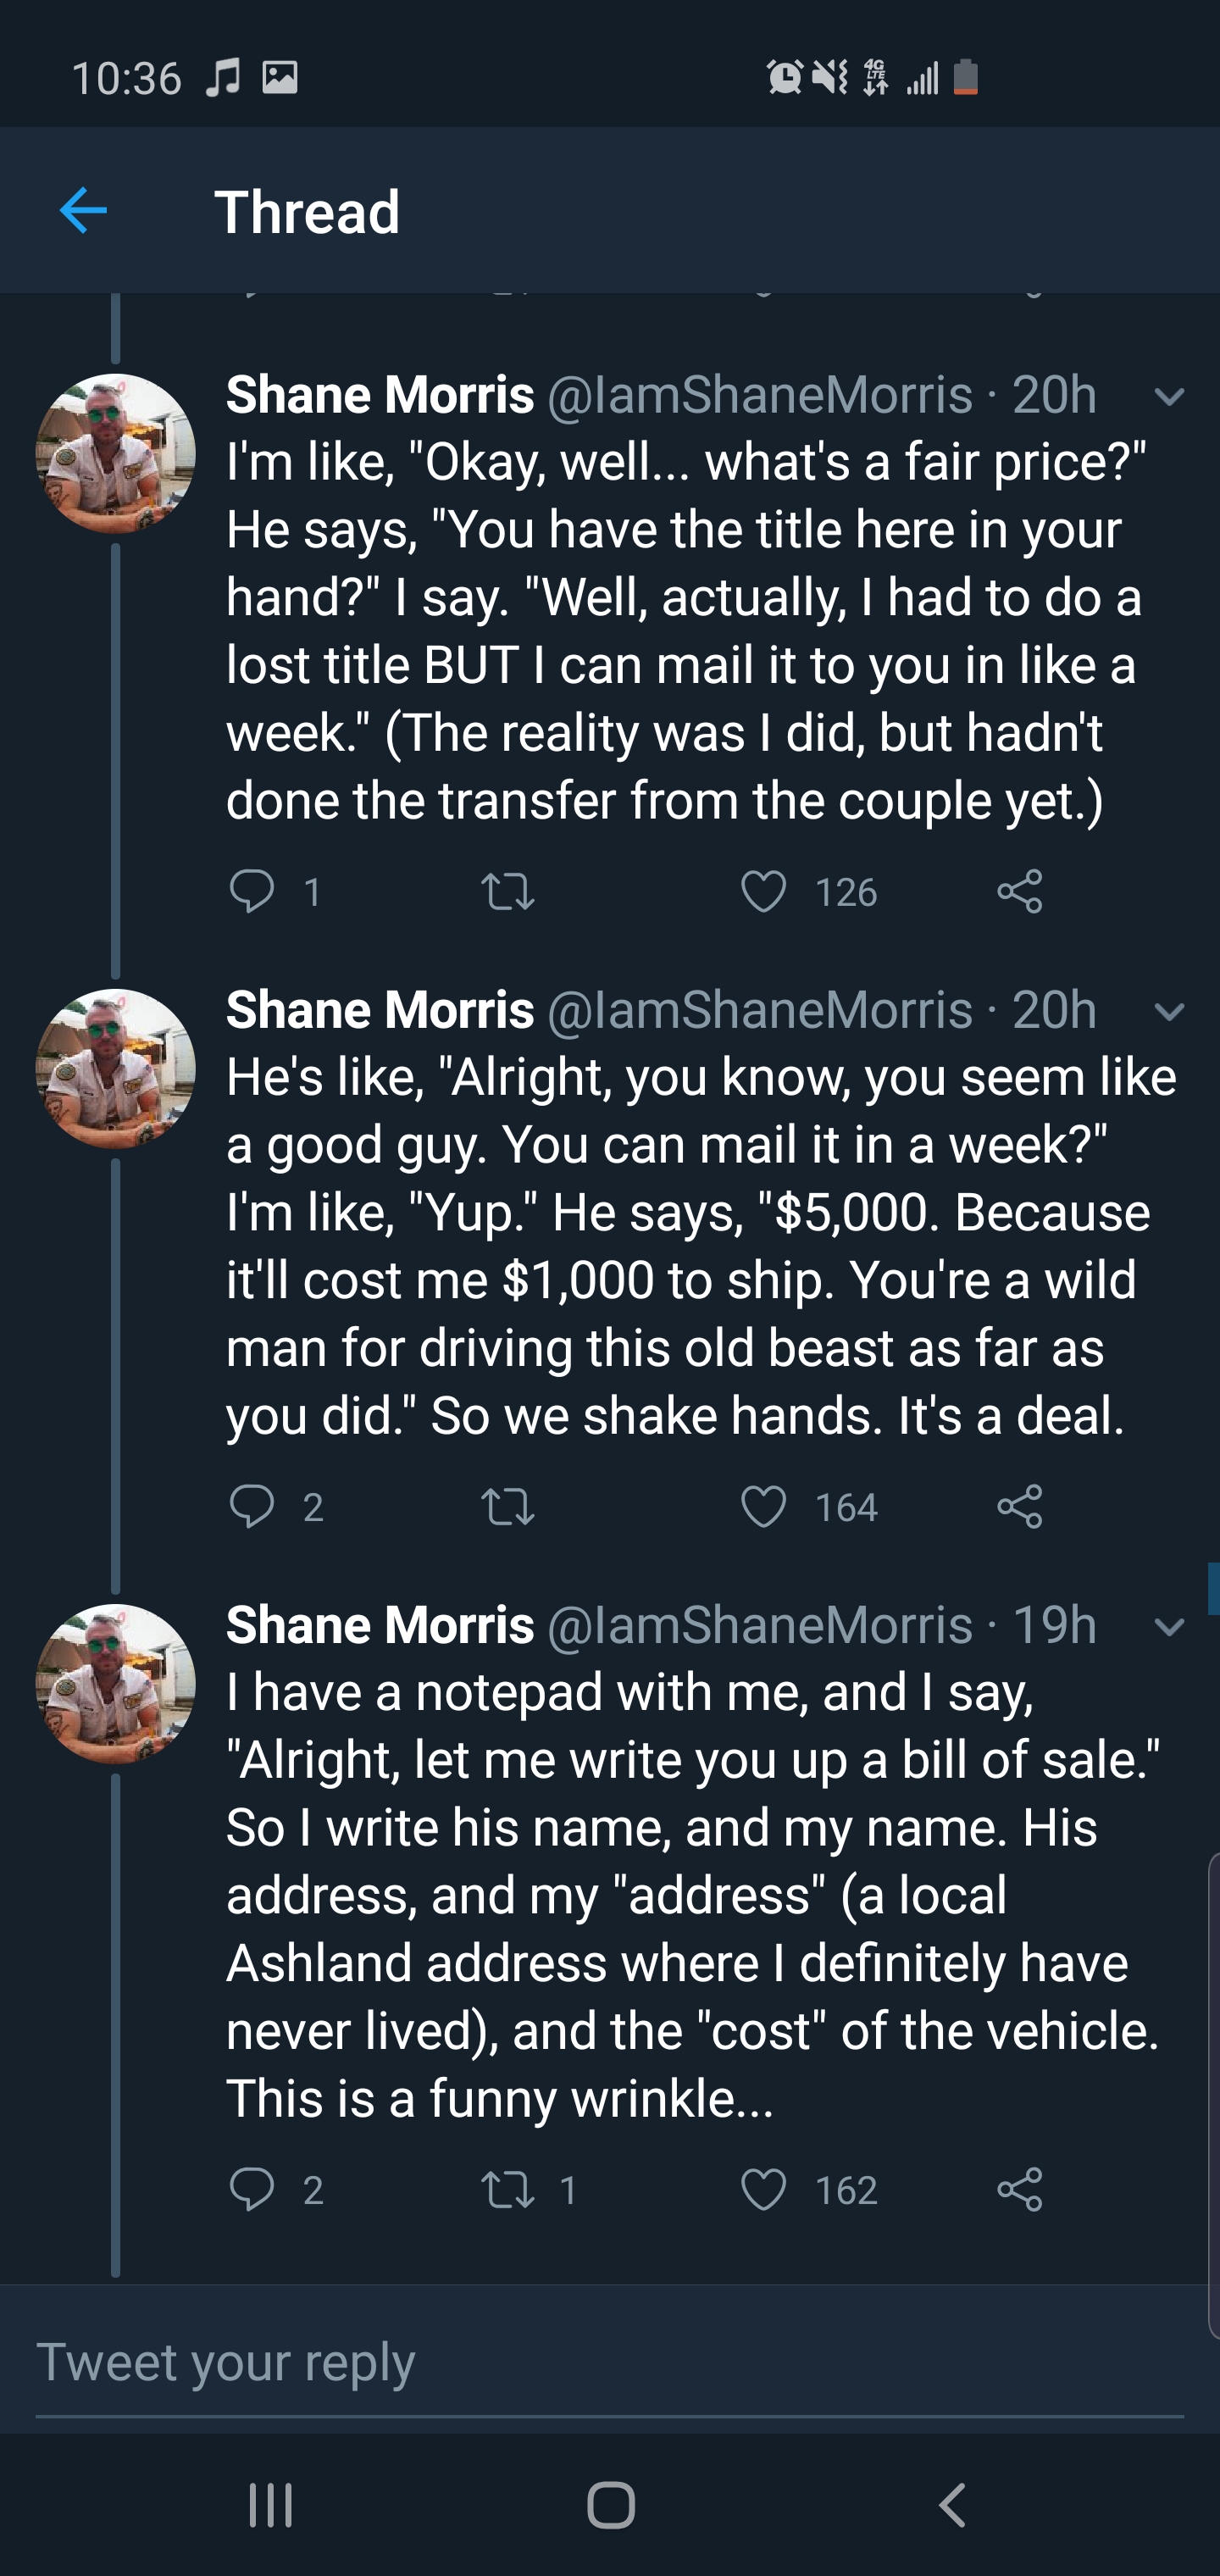 screenshot - A Os Thread Shane Morris 20h I'm , "Okay, well... what's a fair price?" He says. "You have the title here in your hand?" I say. "Well, actually, I had to do a lost title But I can mail it to you in a week." The reality was I did, but hadn't d